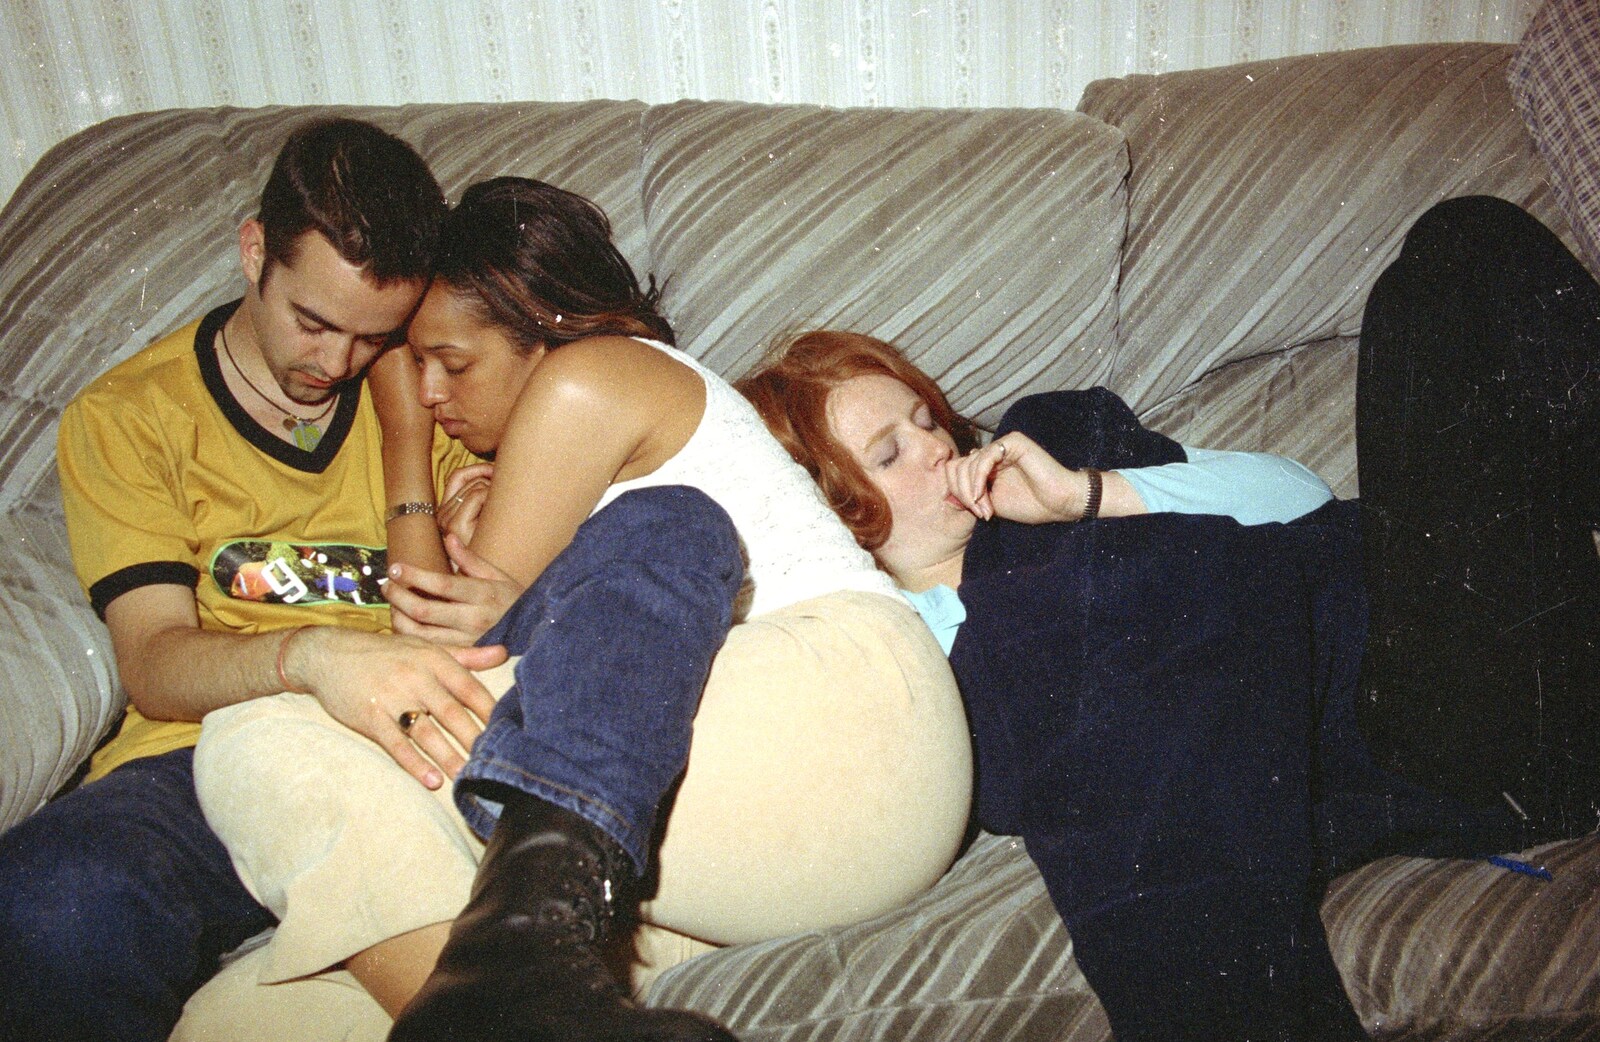 Andrew's CISU Party and the Radio One Roadshow, Ipswich, Suffolk - 18th June 1997: Trev, Natalie and another have a sleep